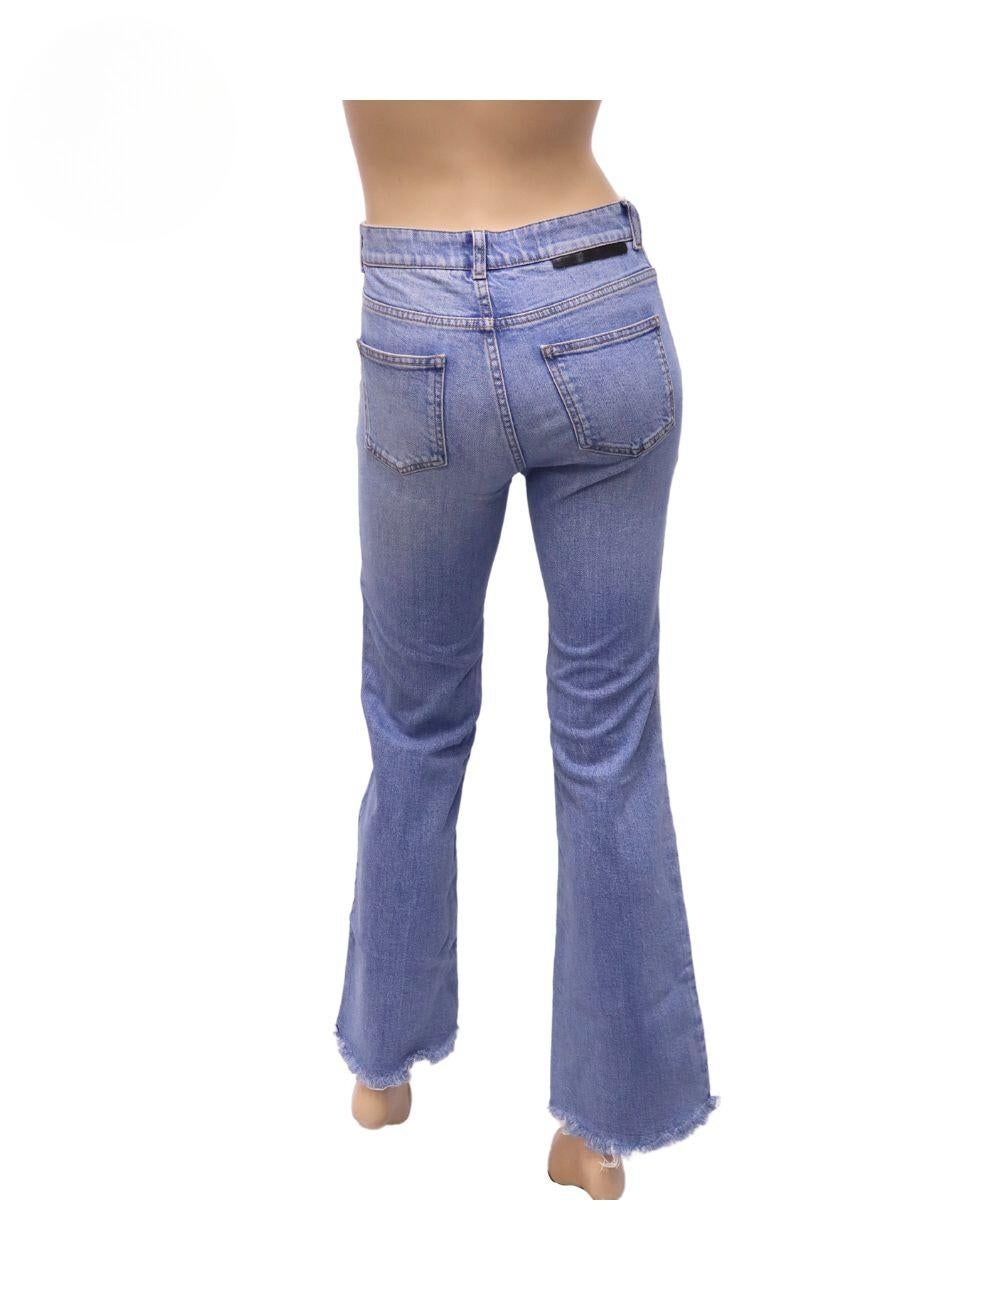 Stella McCartney high-rise flared jeans size EU 36 In Excellent Condition For Sale In Amman, JO